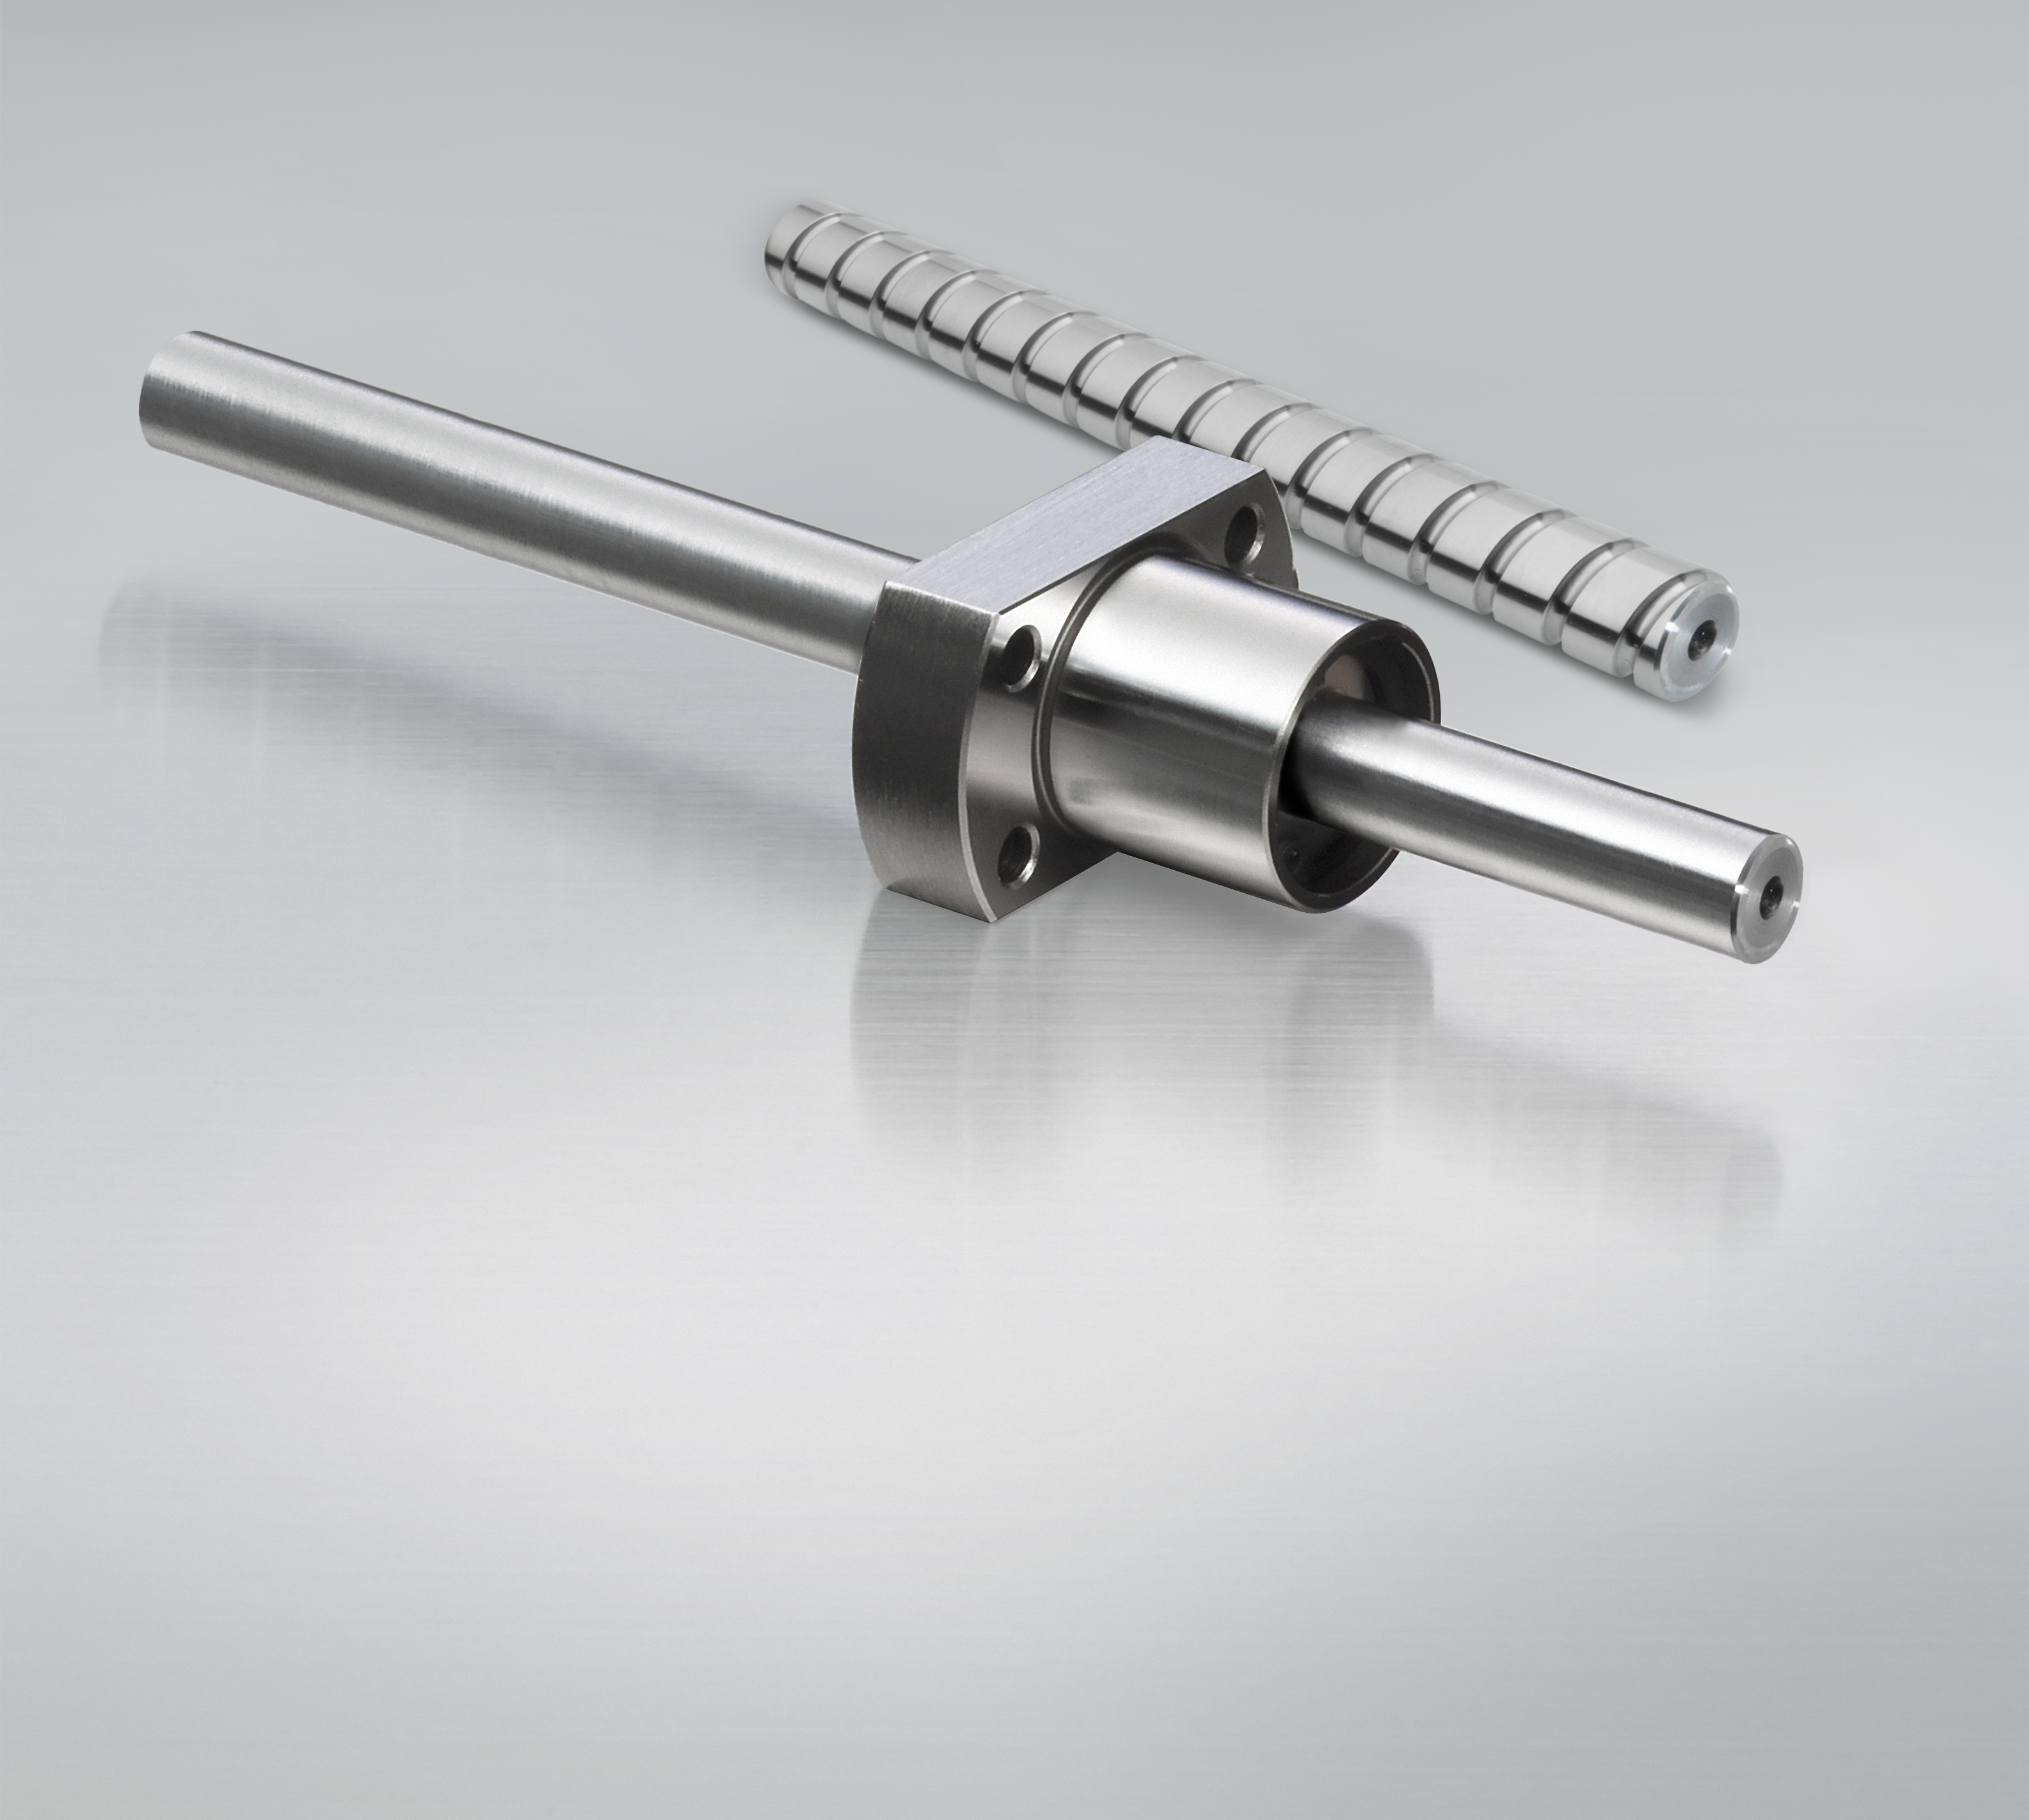 NSK’s BS Interchangeable precision rolled ball screw series 